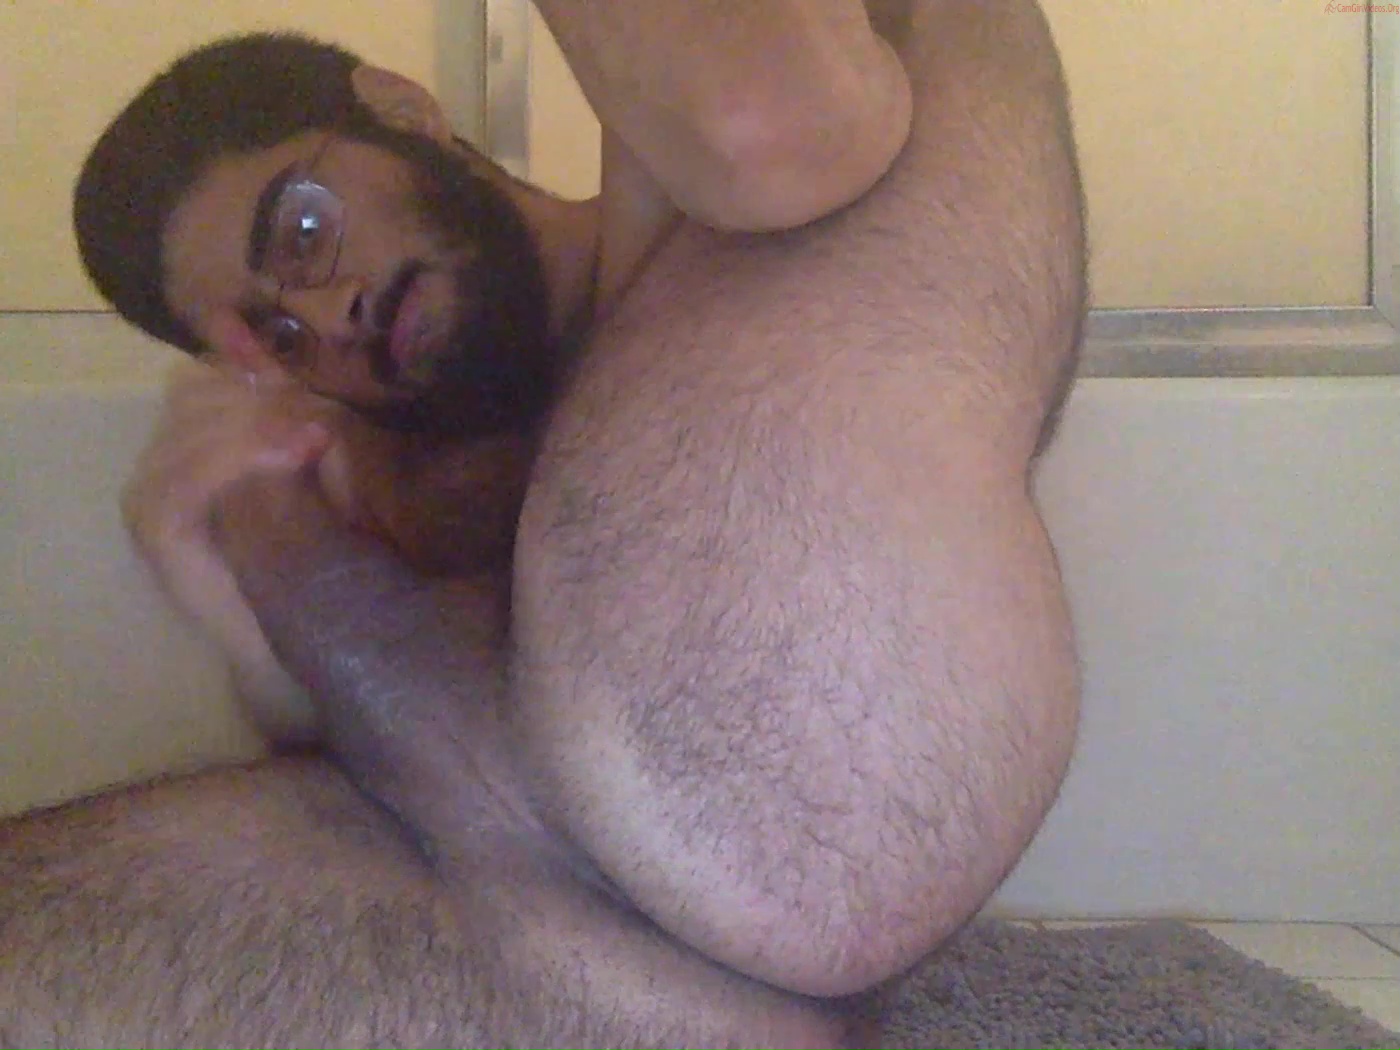 1400px x 1050px - Hairy arab in an intense session with himself - ThisVid.com